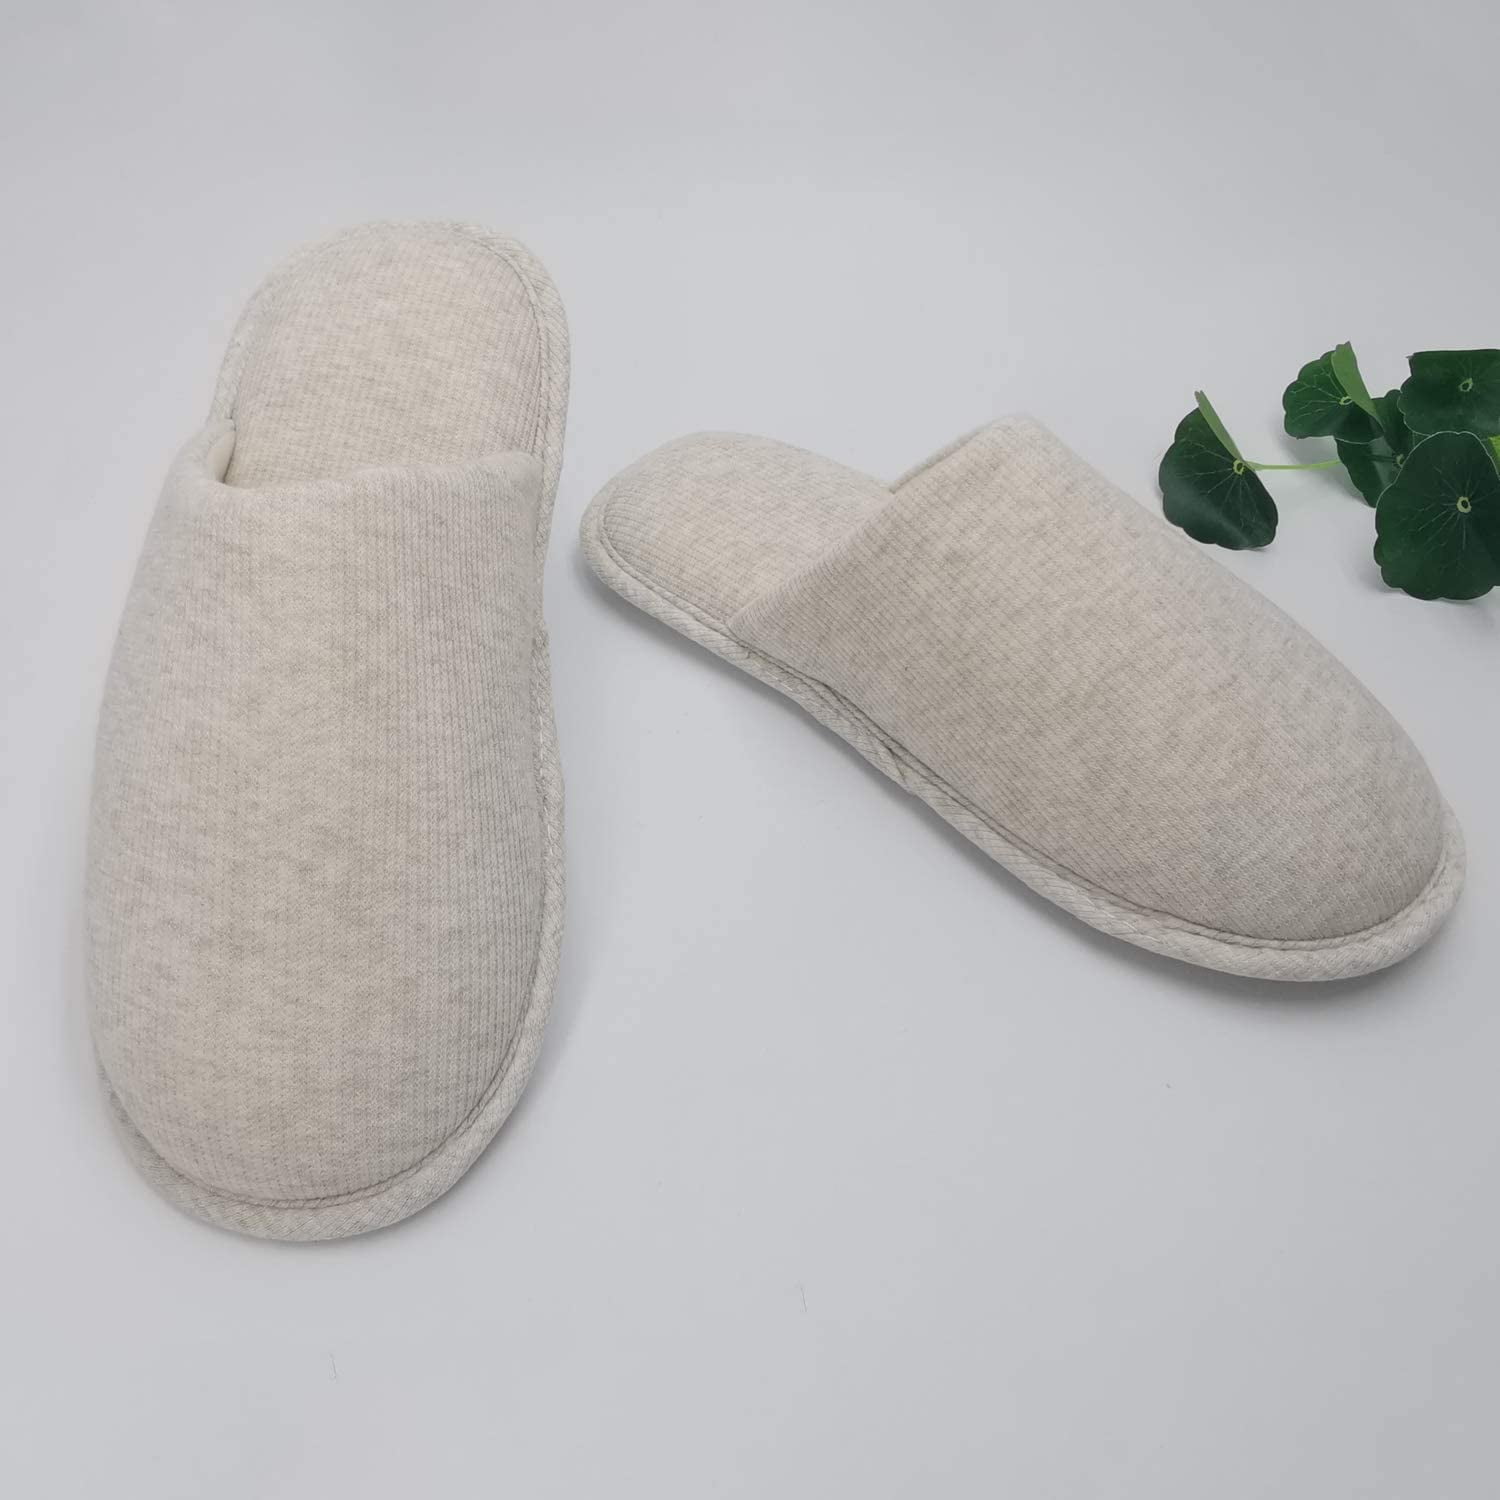 ofoot Womens Organic Cotton Non Slip House Slippers,Cozy Memory Foam Washable for Summer Bedroom,Rubber Sole